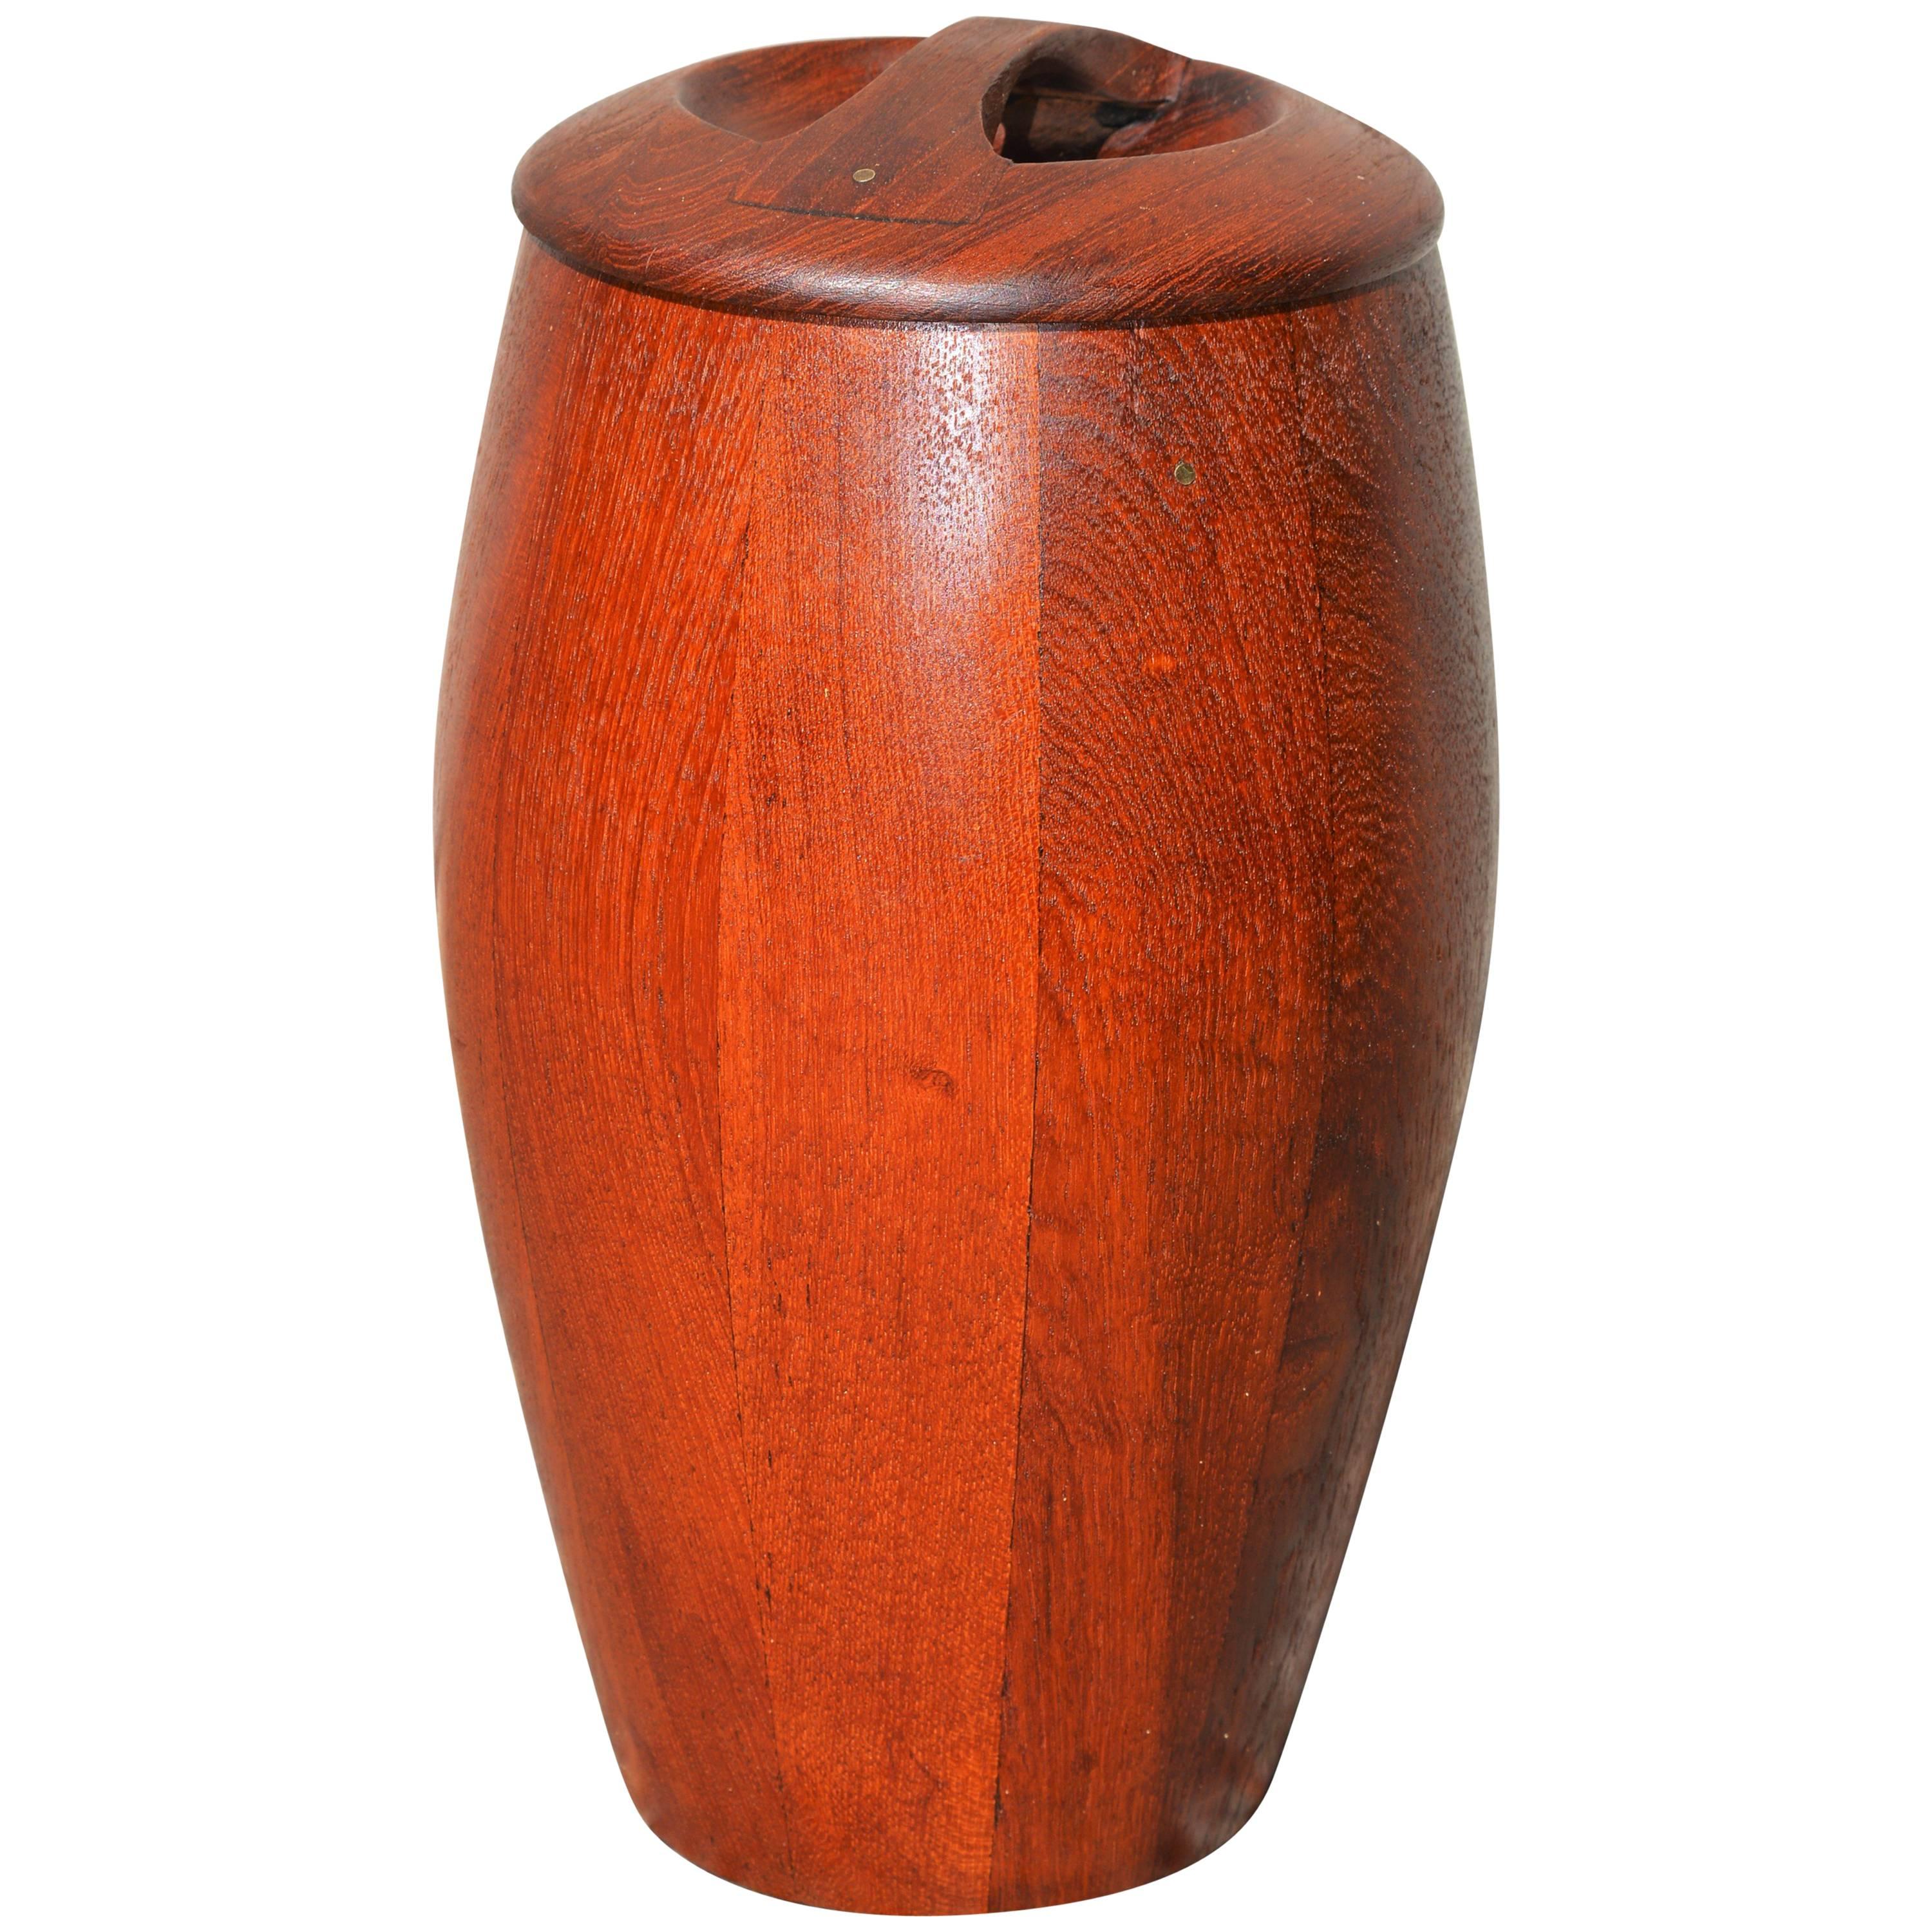 Jens Quistgaard Early 1950s Staved Teak Ice Bucket with Locking Lid For Sale